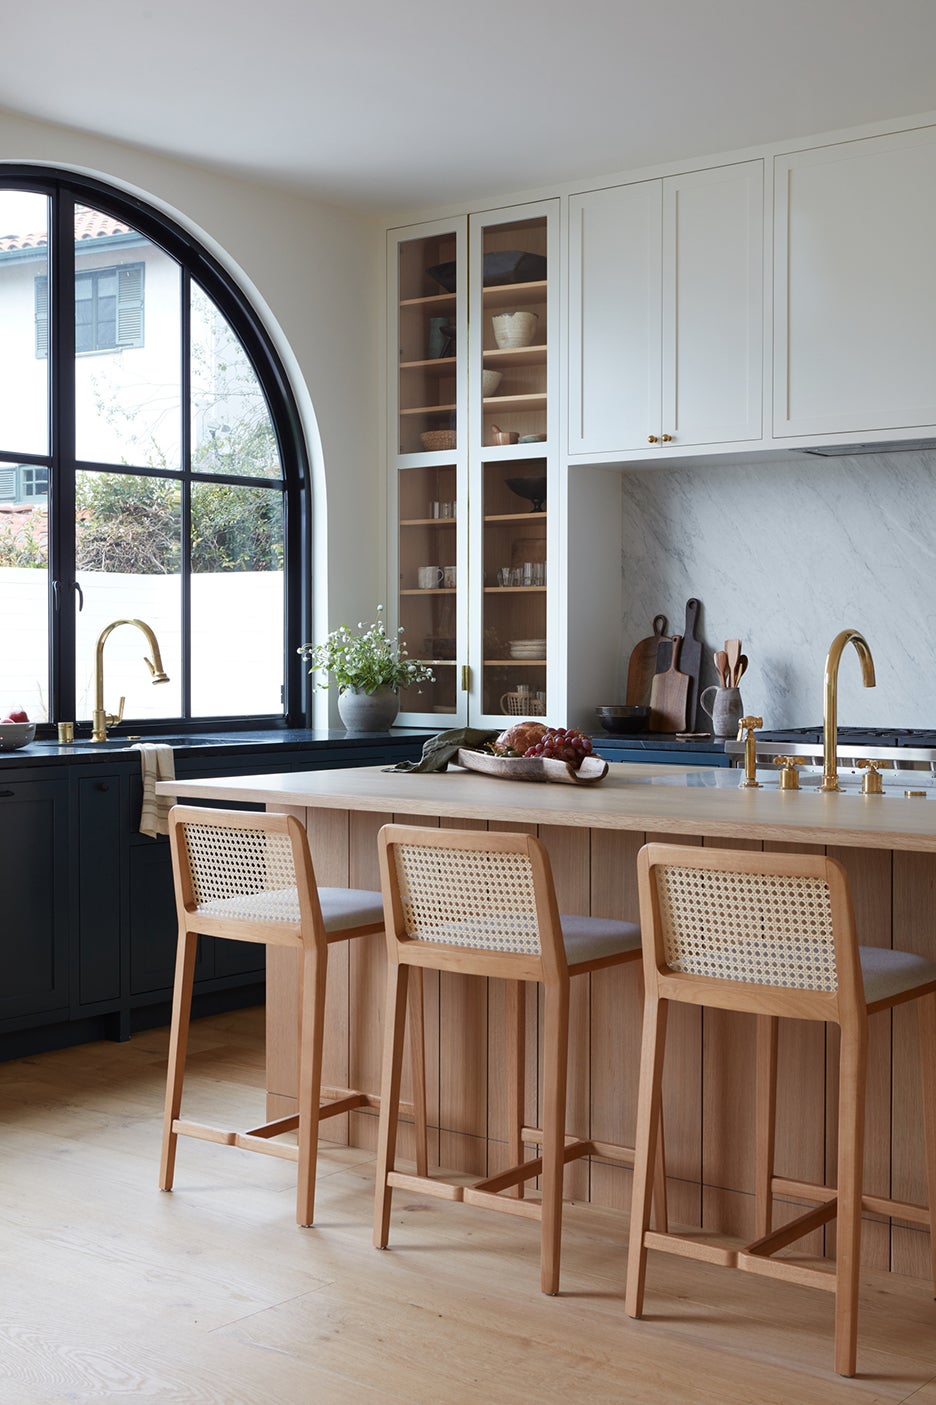 Kitchen with arched window